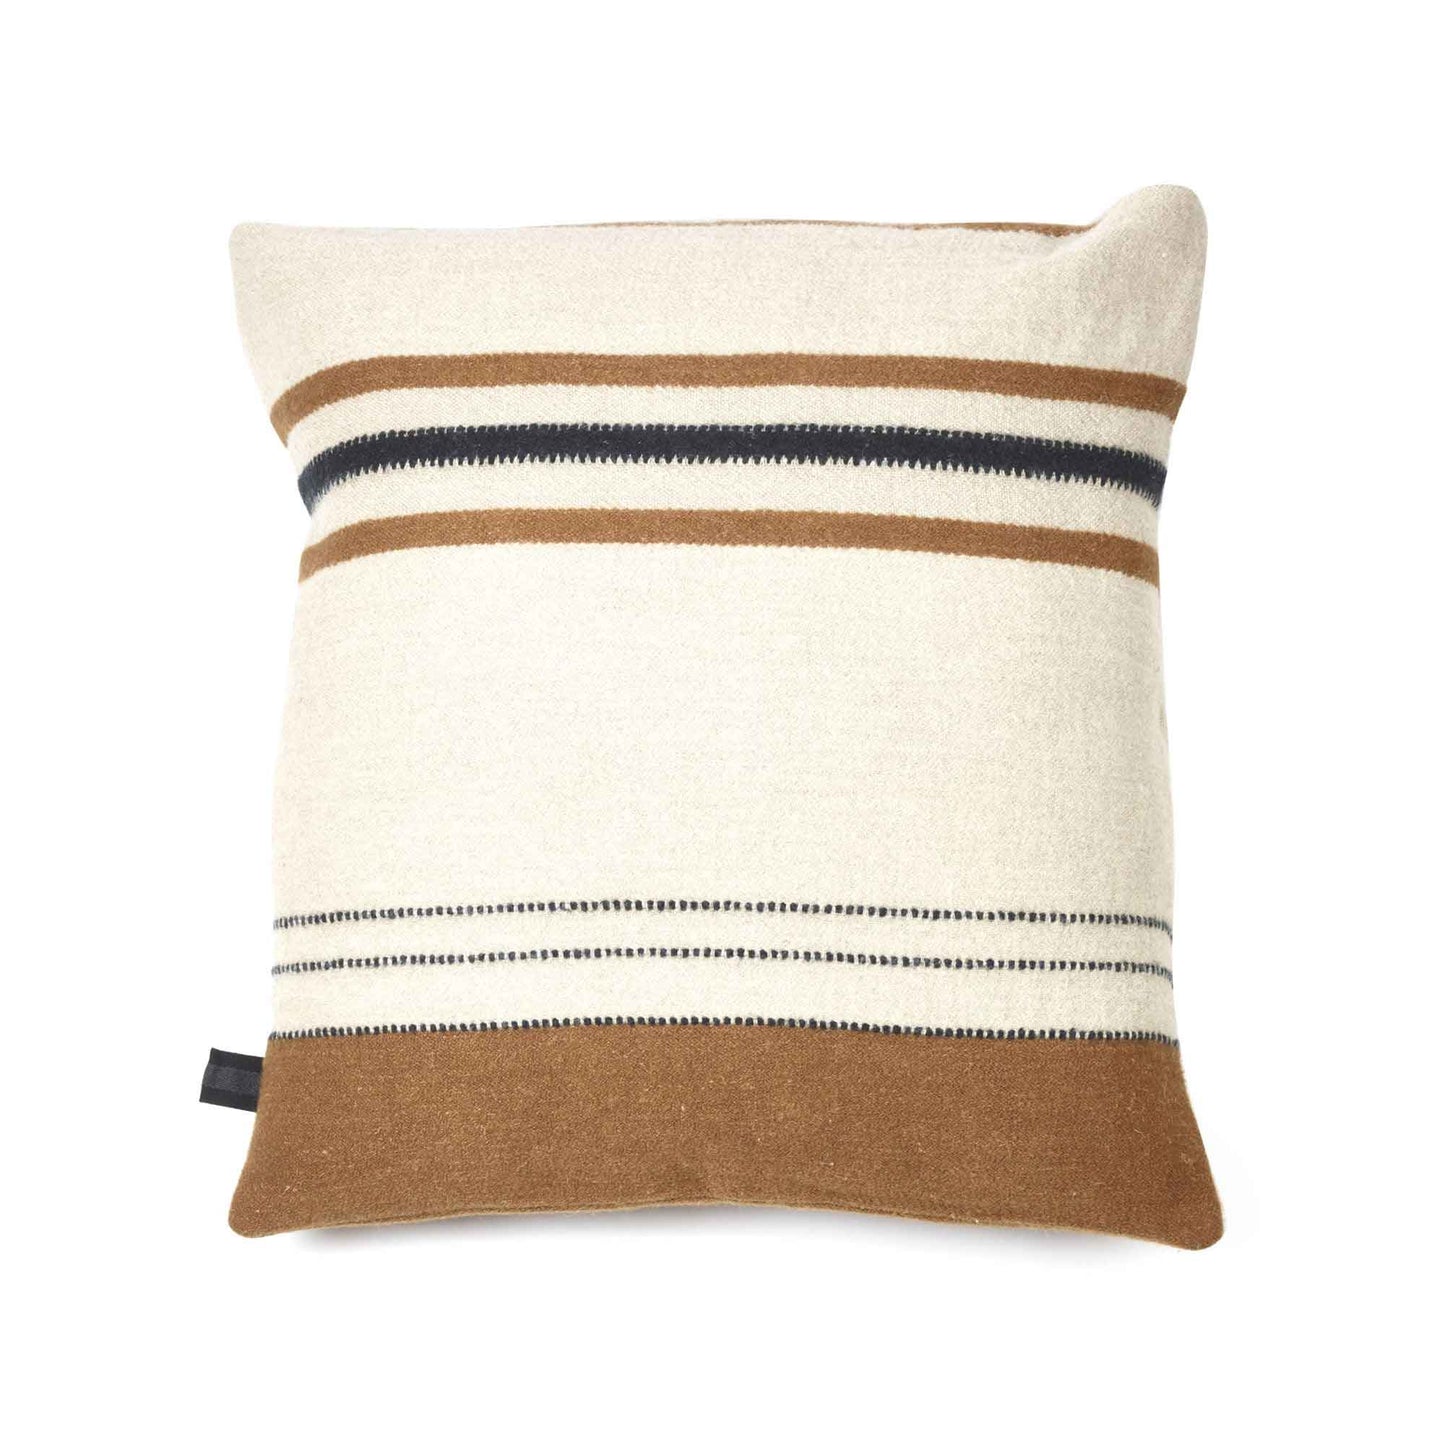 Linen and wool blend throw pillow cover flat lay product shot in color Foundry by Libeco for South Hous.